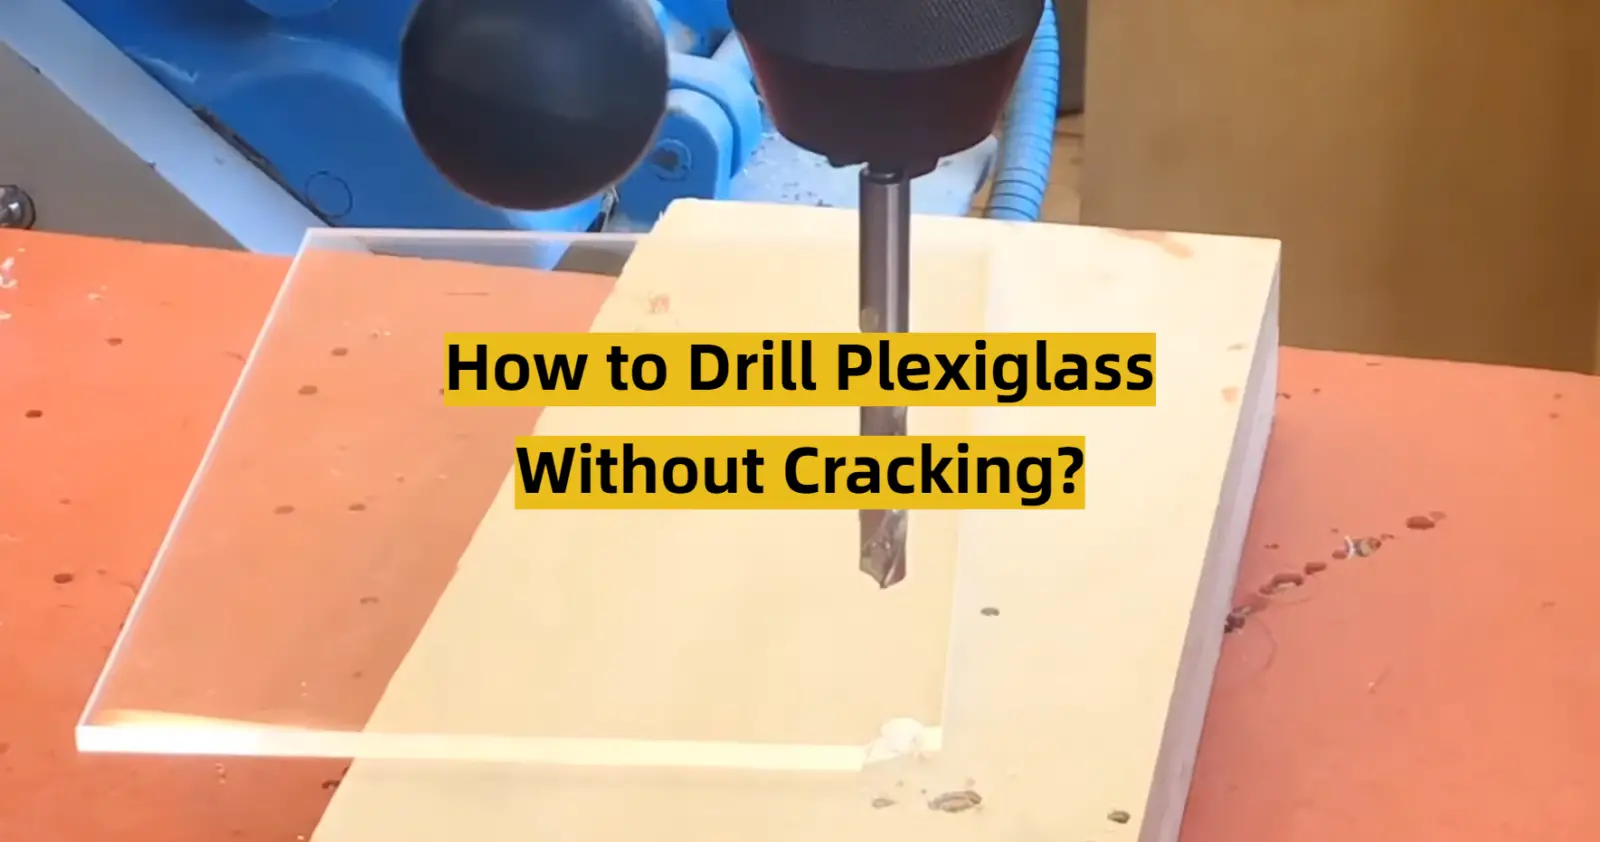 How to Drill Plexiglass Without Cracking?